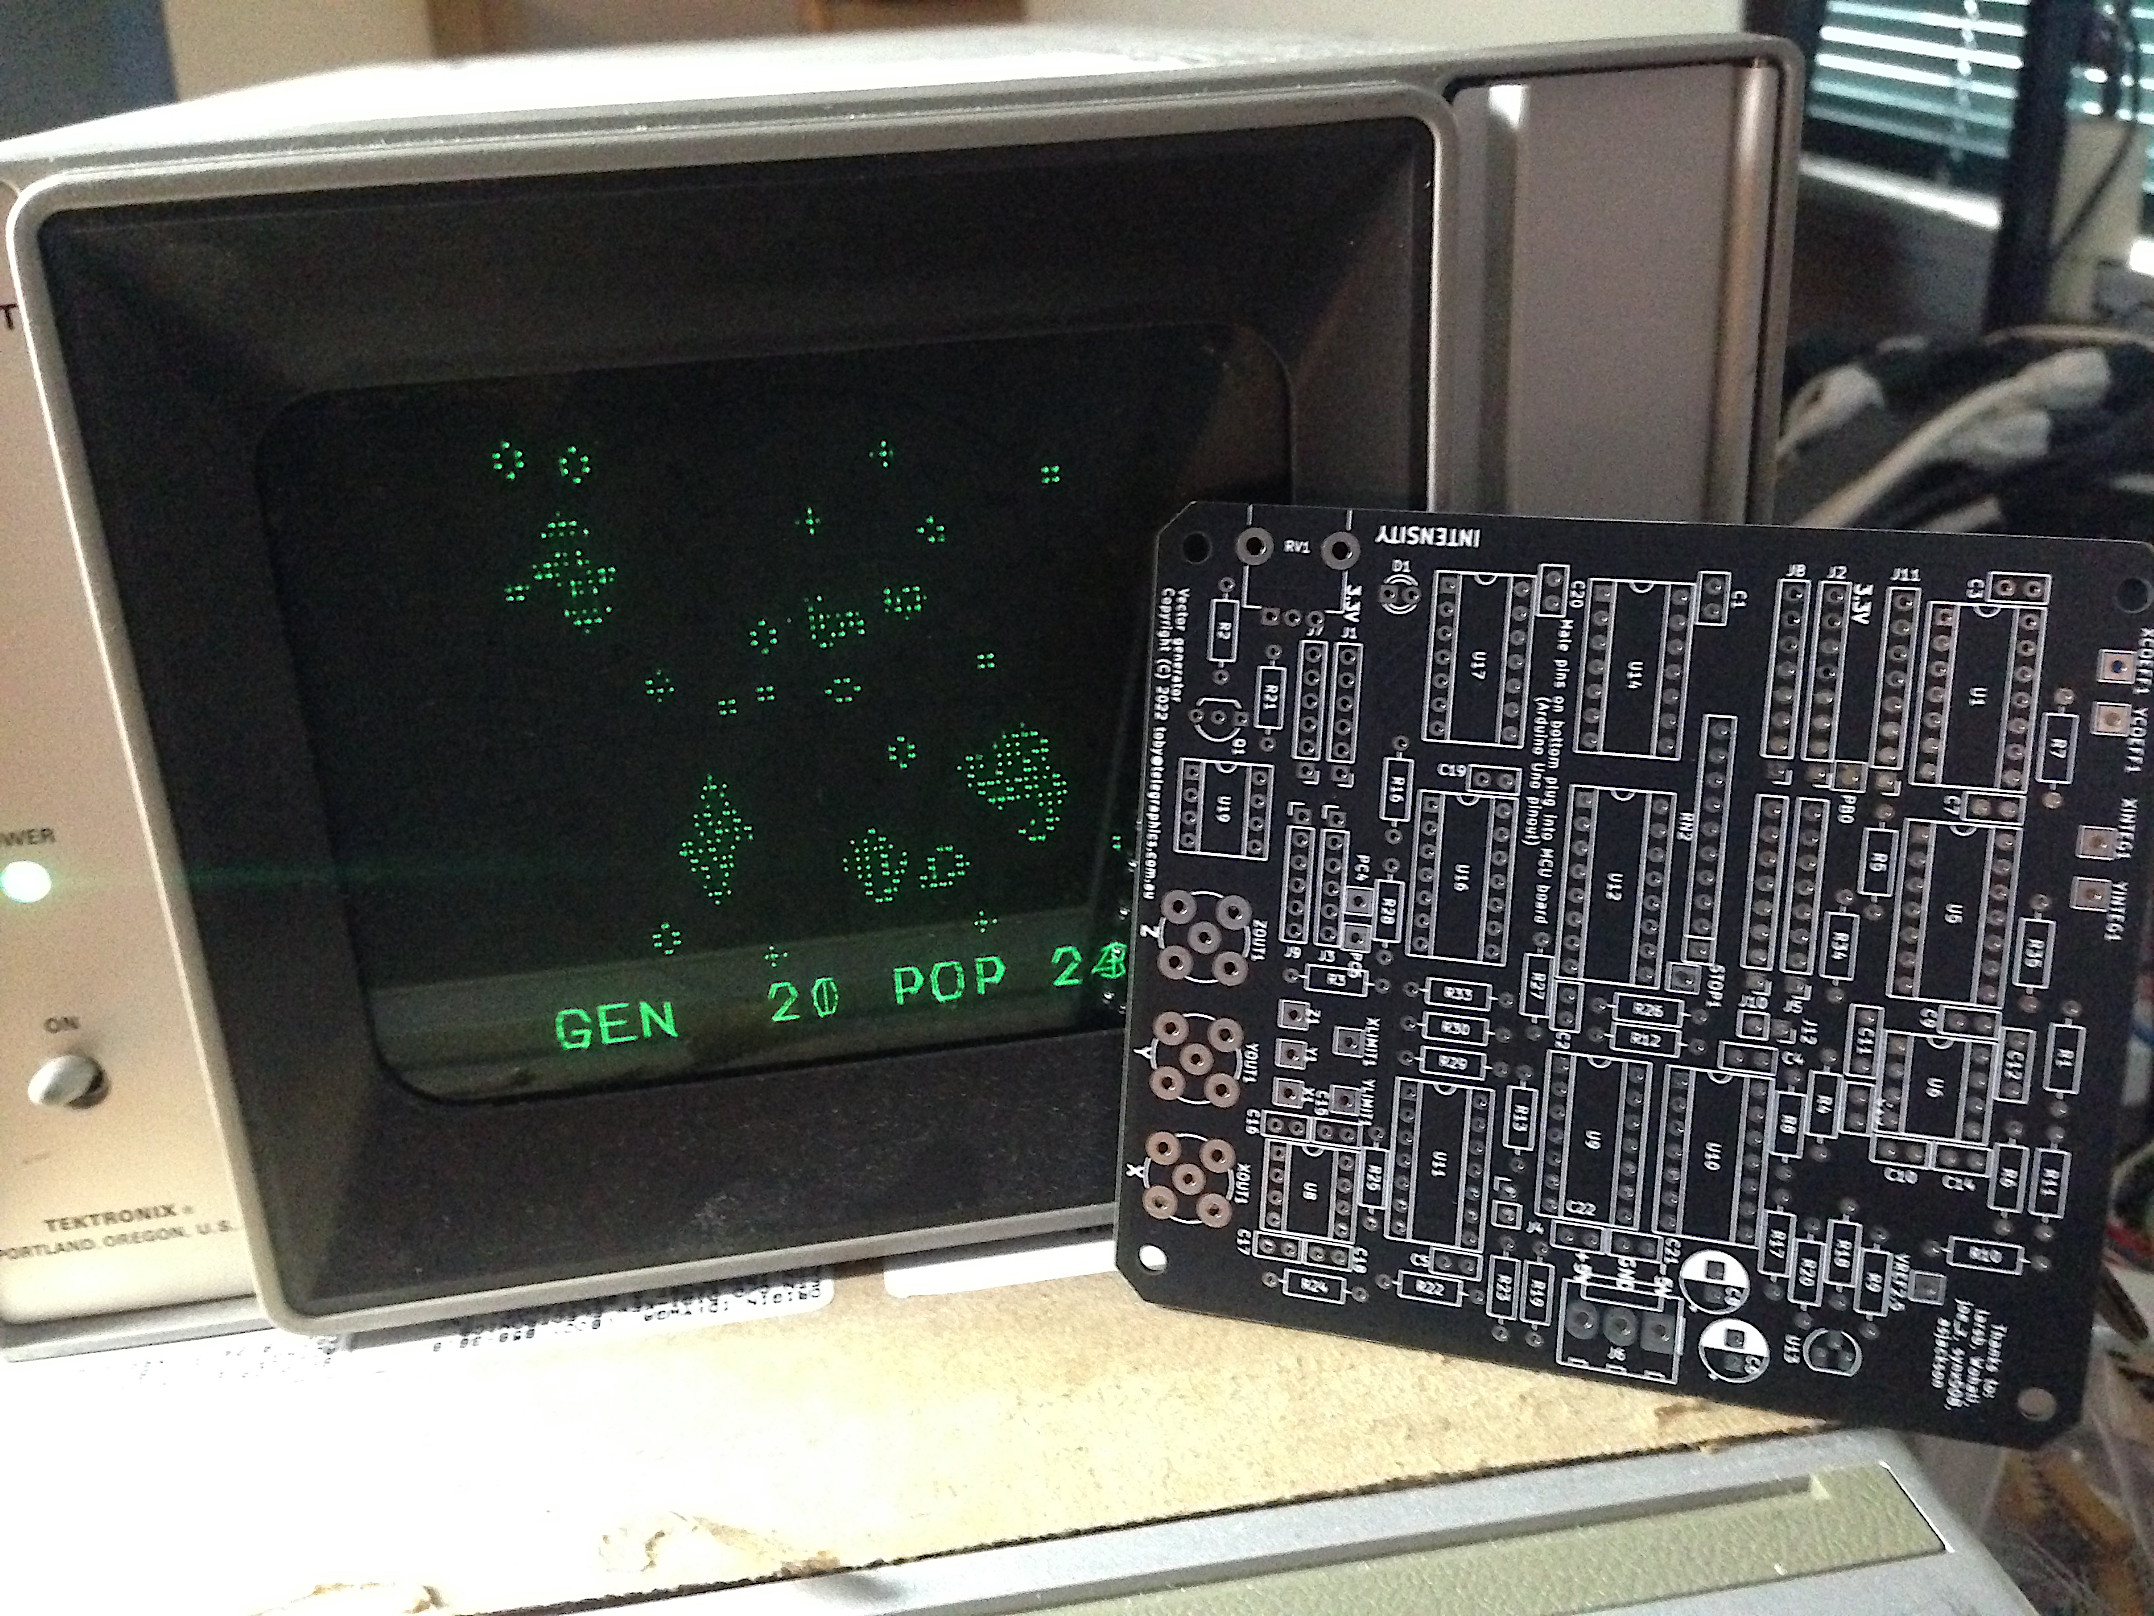 Game of Life displayed on Tektronix 602, along with blank pcb